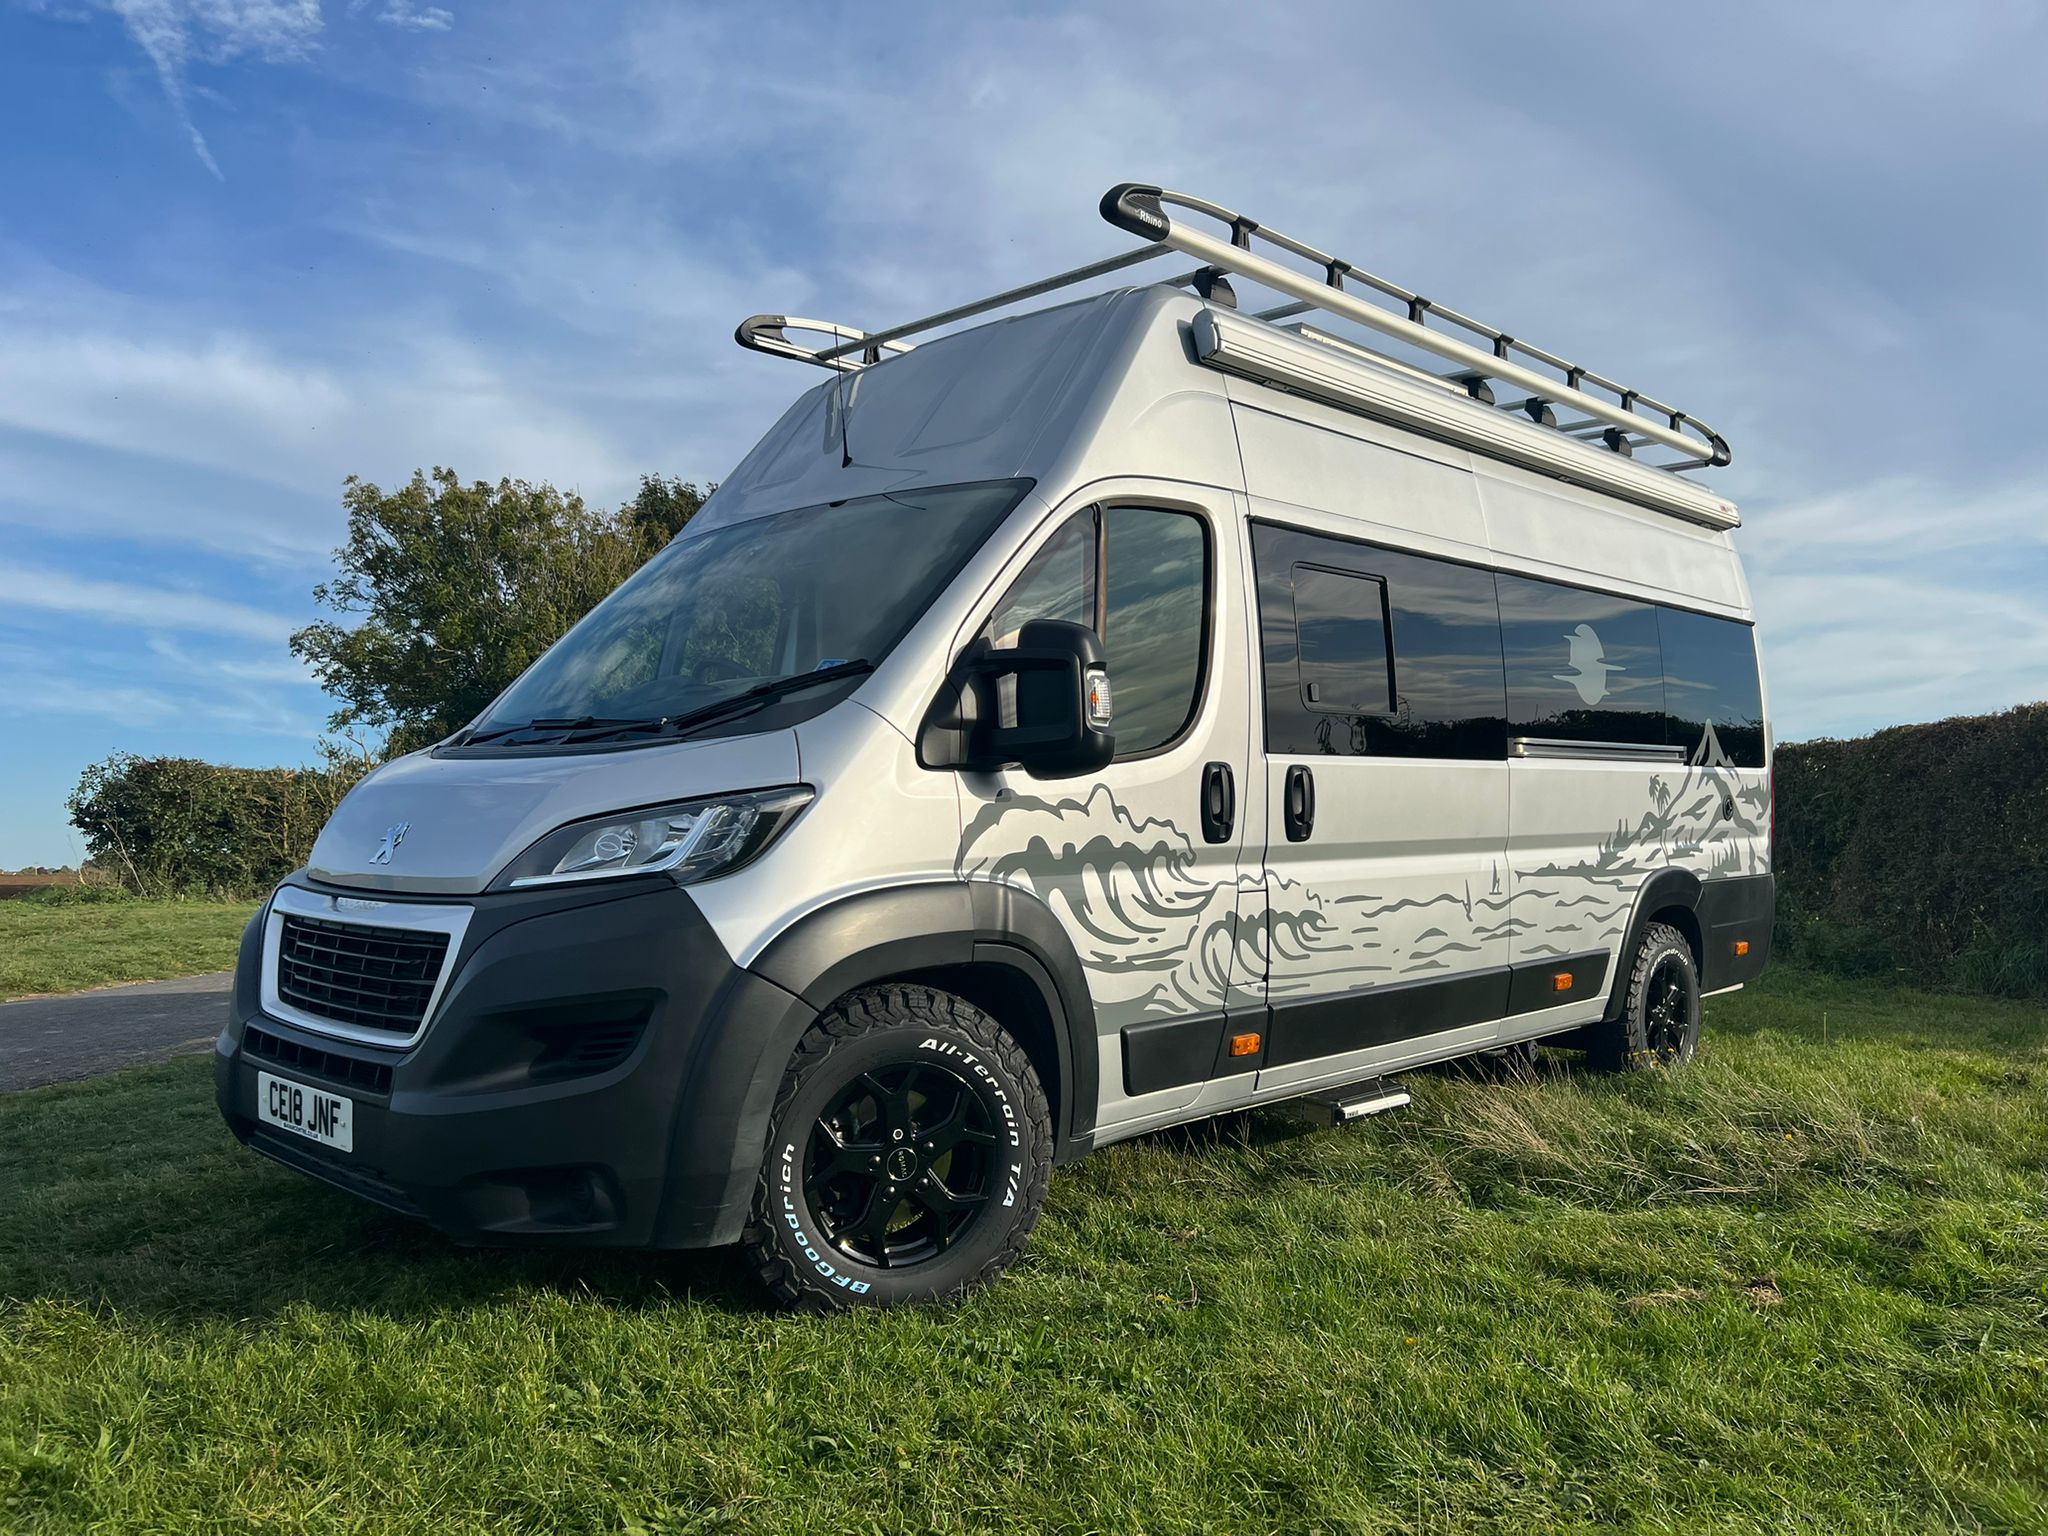 Peugeot Boxer tyres from the van experts - 4x4 Tyres